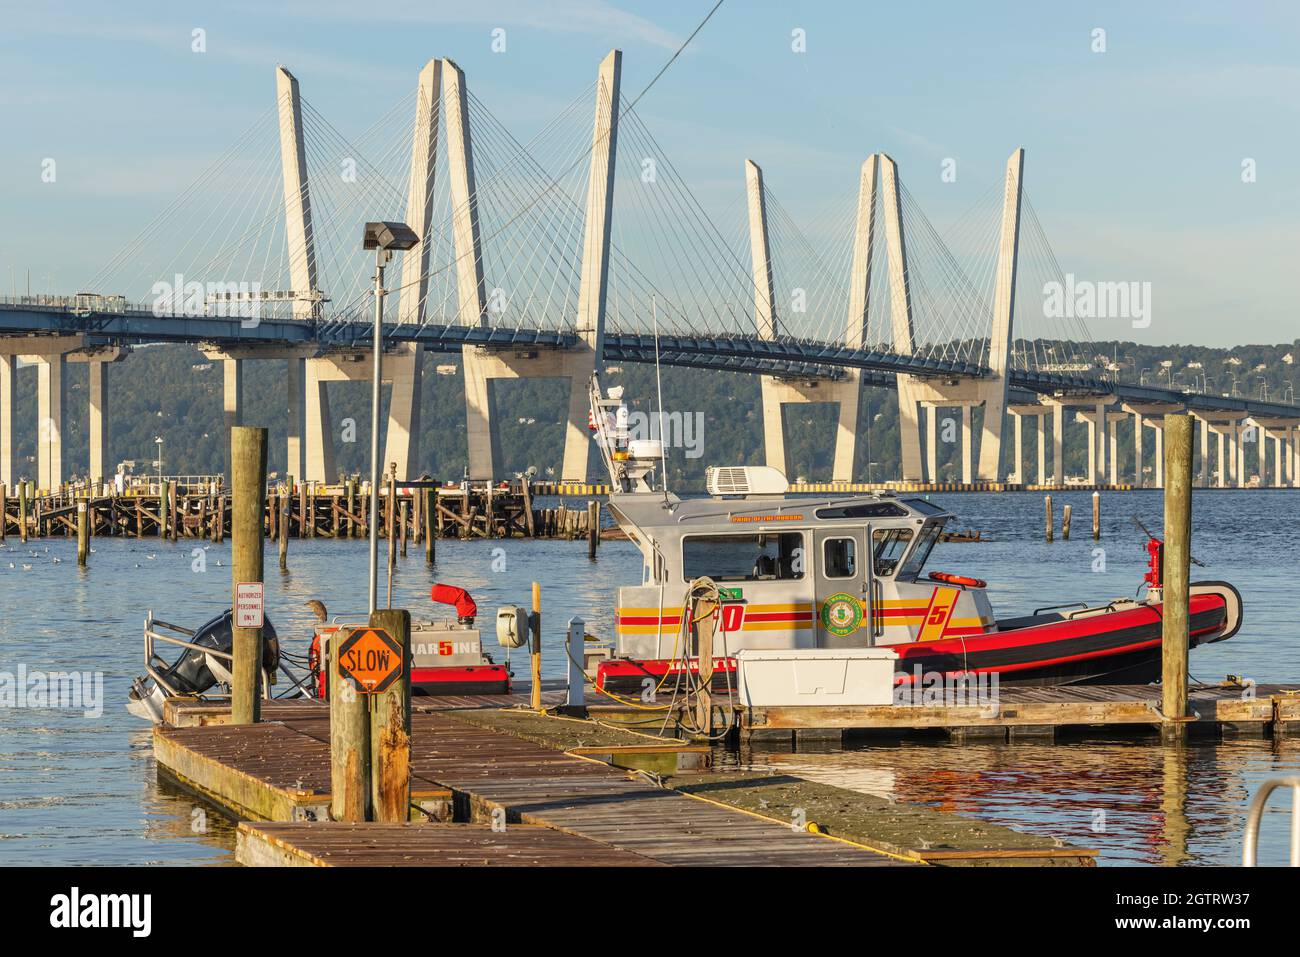 Tarrytown Fire Department fire-rescue boat 'Chief John Kelly' docked on the Hudson River, with the Governor Mario M. Cuomo bridge in the background. Stock Photo